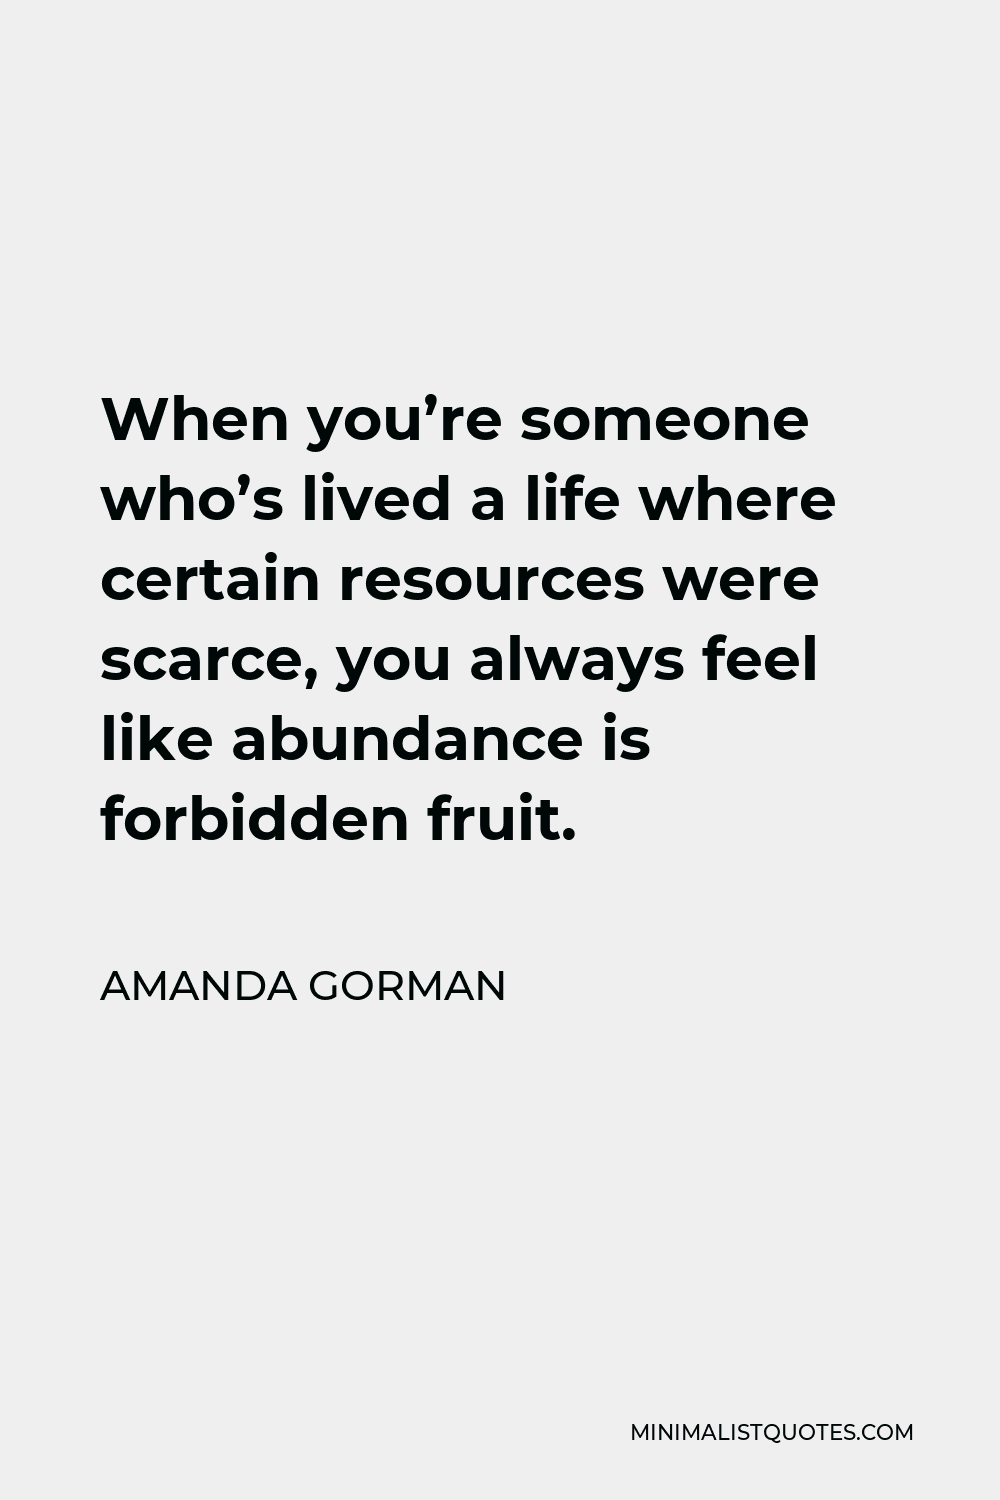 Amanda Gorman Quote - When you’re someone who’s lived a life where certain resources were scarce, you always feel like abundance is forbidden fruit.